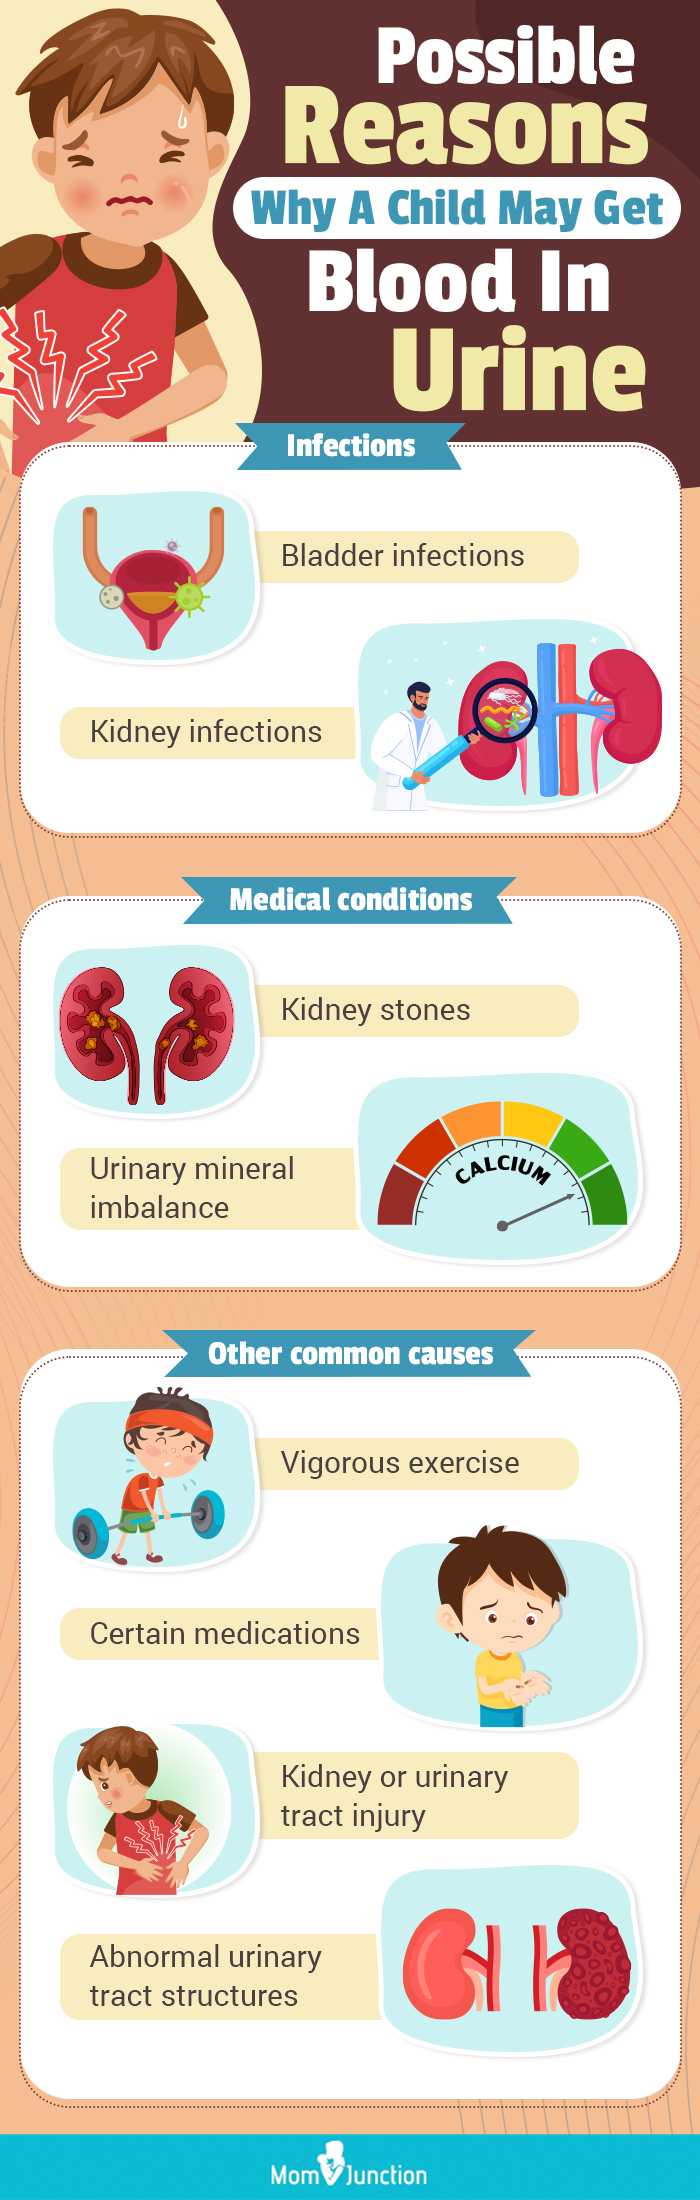 possible reasons why a child may get blood in urine (infographic)